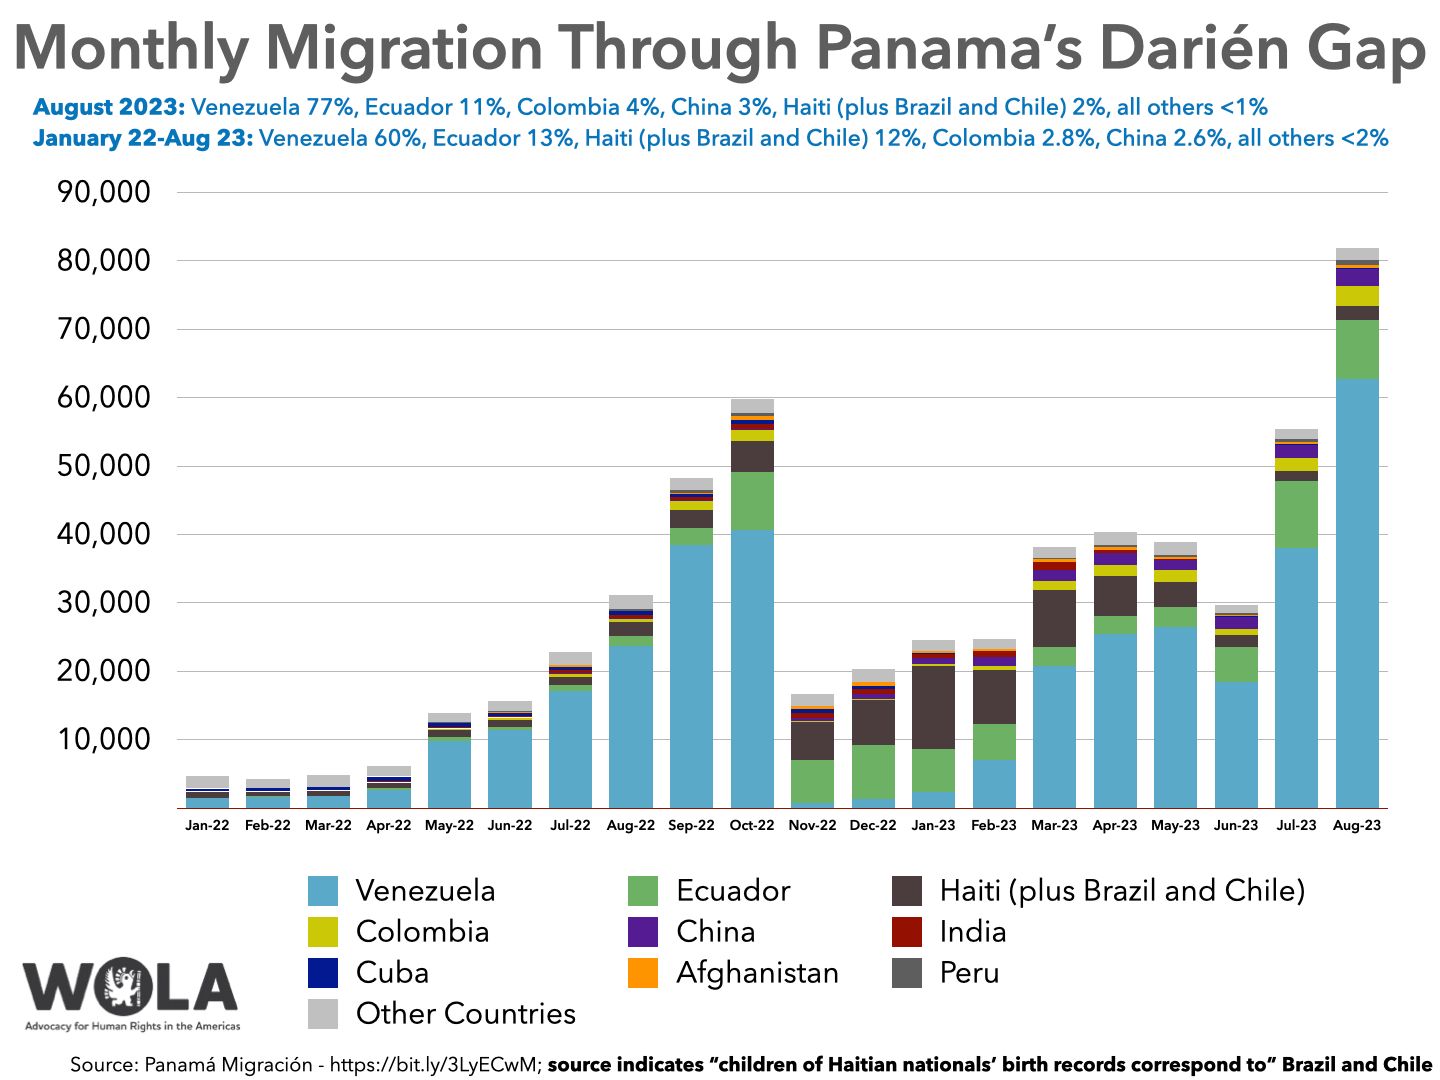 Monthly Migration Through Panama’s Darién Gap  August 2023: Venezuela 77%, Ecuador 11%, Colombia 4%, China 3%, Haiti (plus Brazil and Chile) 2%, all others <1%  January 22-Aug 23: Venezuela 60%, Ecuador 13%, Haiti (plus Brazil and Chile) 12%, Colombia 2.8%, China 2.6%, all others <2%  	Jan-22	Feb-22	Mar-22	Apr-22	May-22	Jun-22	Jul-22	Aug-22	Sep-22	Oct-22	Nov-22	Dec-22	Jan-23	Feb-23	Mar-23	Apr-23	May-23	Jun-23	Jul-23	Aug-23 Venezuela	1421	1573	1704	2694	9844	11359	17066	23632	38399	40593	668	1374	2337	7097	20816	25395	26409	18501	38033	62700 Ecuador	100	156	121	181	527	555	883	1581	2594	8487	6350	7821	6352	5203	2772	2683	3059	5052	9773	8642 Haiti (plus Brazil and Chile)	807	627	658	785	997	1025	1245	1921	2642	4525	5520	6535	12063	7813	8335	5832	3633	1743	1548	1992 Colombia	48	72	59	72	248	287	407	569	1306	1600	208	188	333	637	1260	1634	1645	894	1884	2989 China	32	39	56	59	67	66	85	119	136	274	377	695	913	1285	1657	1683	1497	1722	1789	2433 India	67	74	88	172	179	228	431	332	350	604	813	756	562	872	1109	446	161	65	96	27 Cuba	367	334	361	634	567	416	574	589	490	663	535	431	142	36	35	59	59	74	123	172 Afghanistan	1	3	40	31	67	82	162	128	180	551	379	596	291	276	359	386	192	217	321	467 Peru	17	23	18	29	88	109	136	247	365	438	34	39	39	100	261	277	394	209	376	653 Other Countries	1842	1361	1722	1477	1310	1506	1833	1986	1742	2038	1748	1862	1602	1338	1495	1902	1913	1245	1444	1871